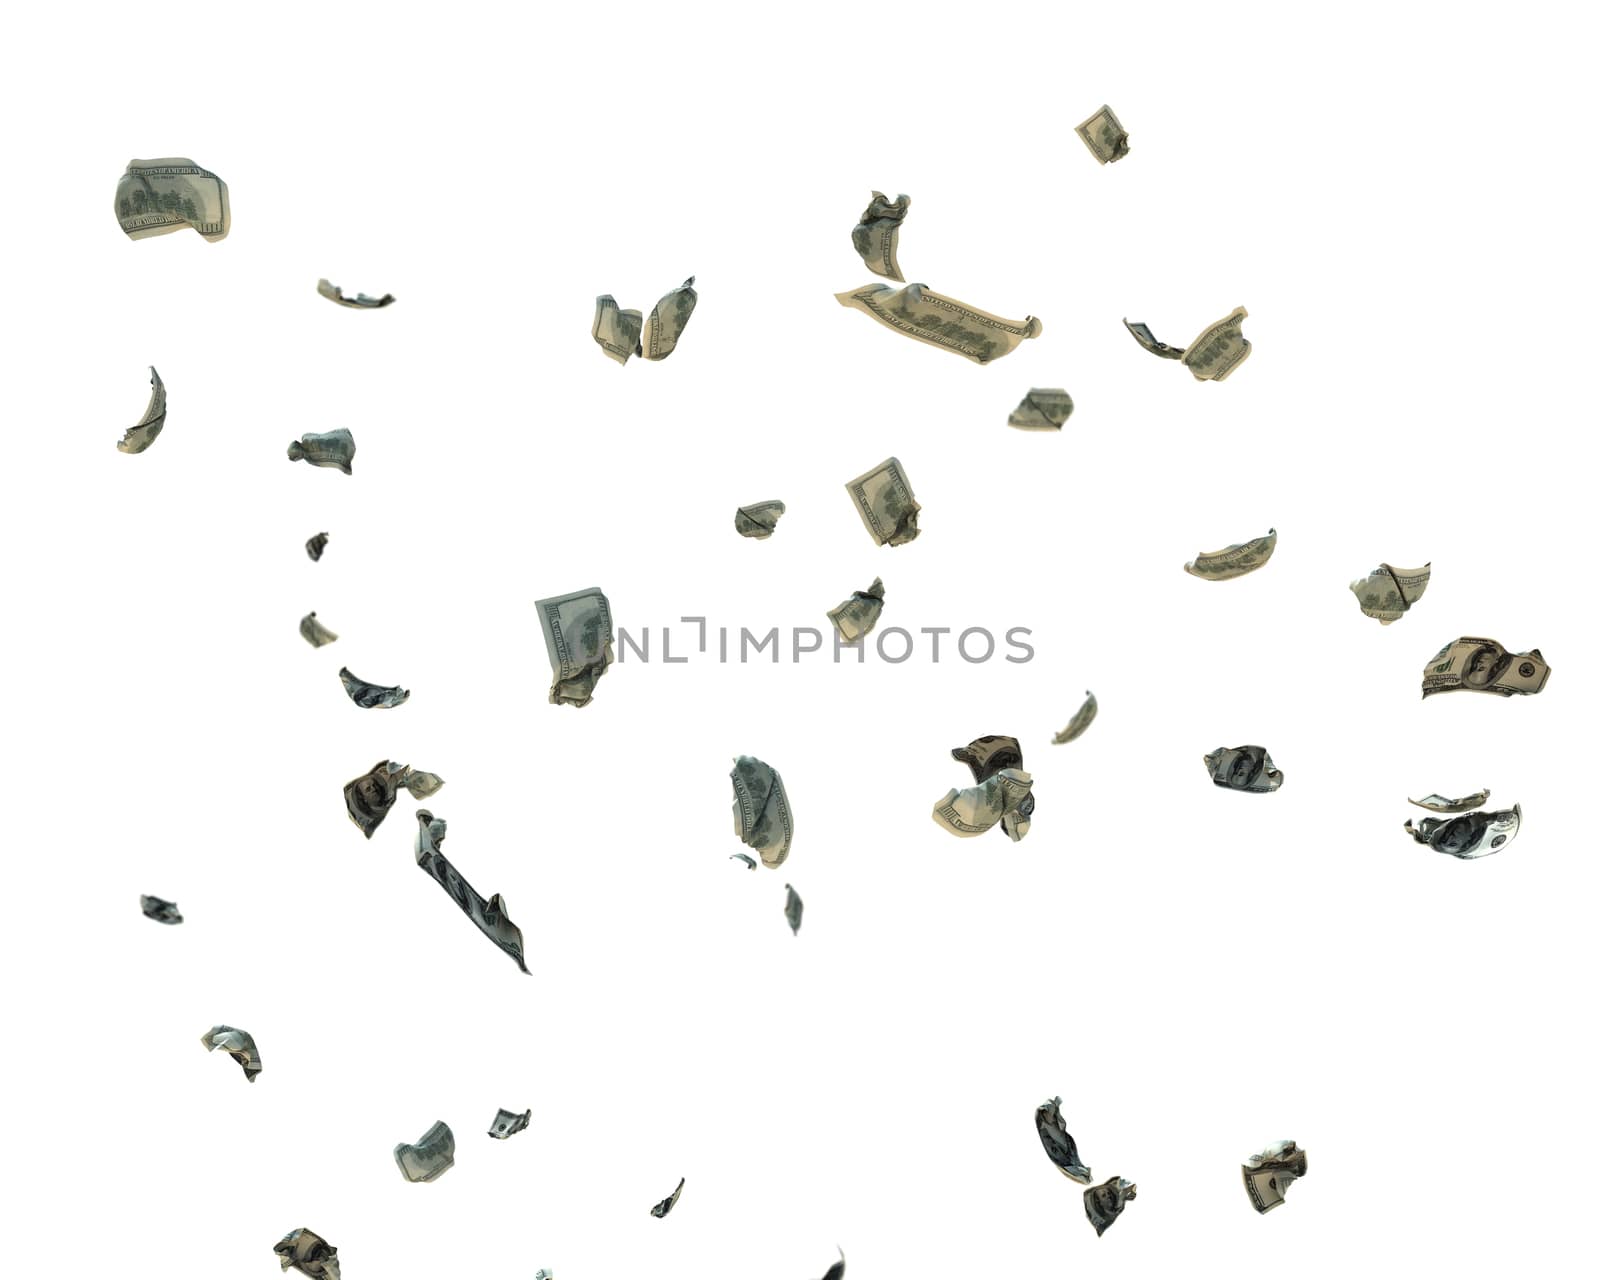 100 US Dollar Crumpled Banknotes flying, against white, clipping path included